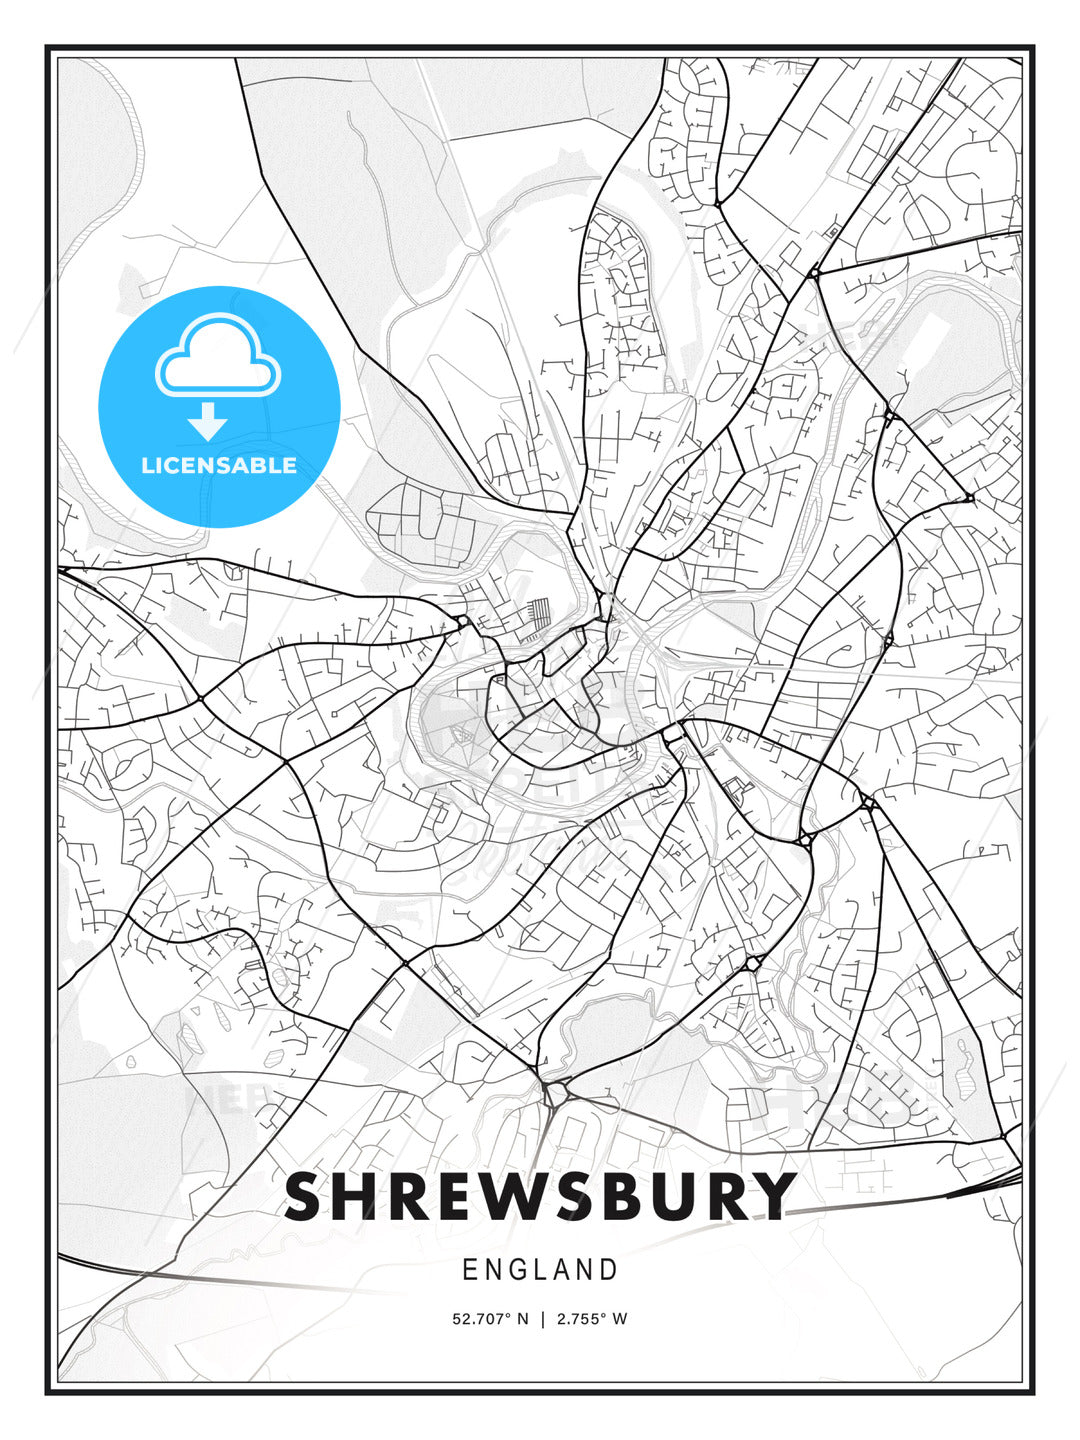 Shrewsbury, England, Modern Print Template in Various Formats - HEBSTREITS Sketches